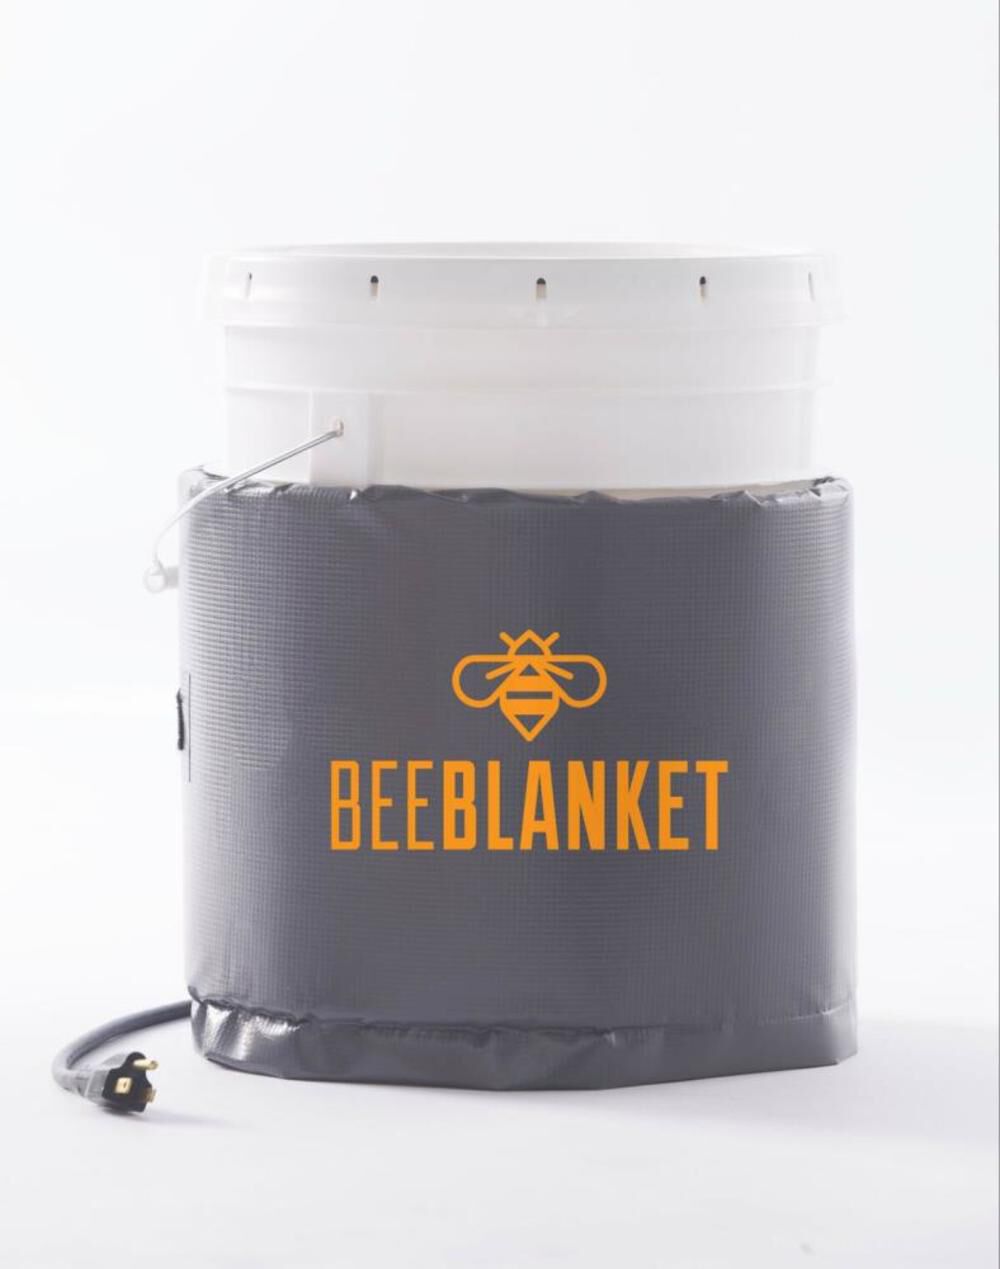 Bee Blanket 5 Gallon Insulated Pail Heater - Honey Heater with Fixed Thermostat 110 F BB05